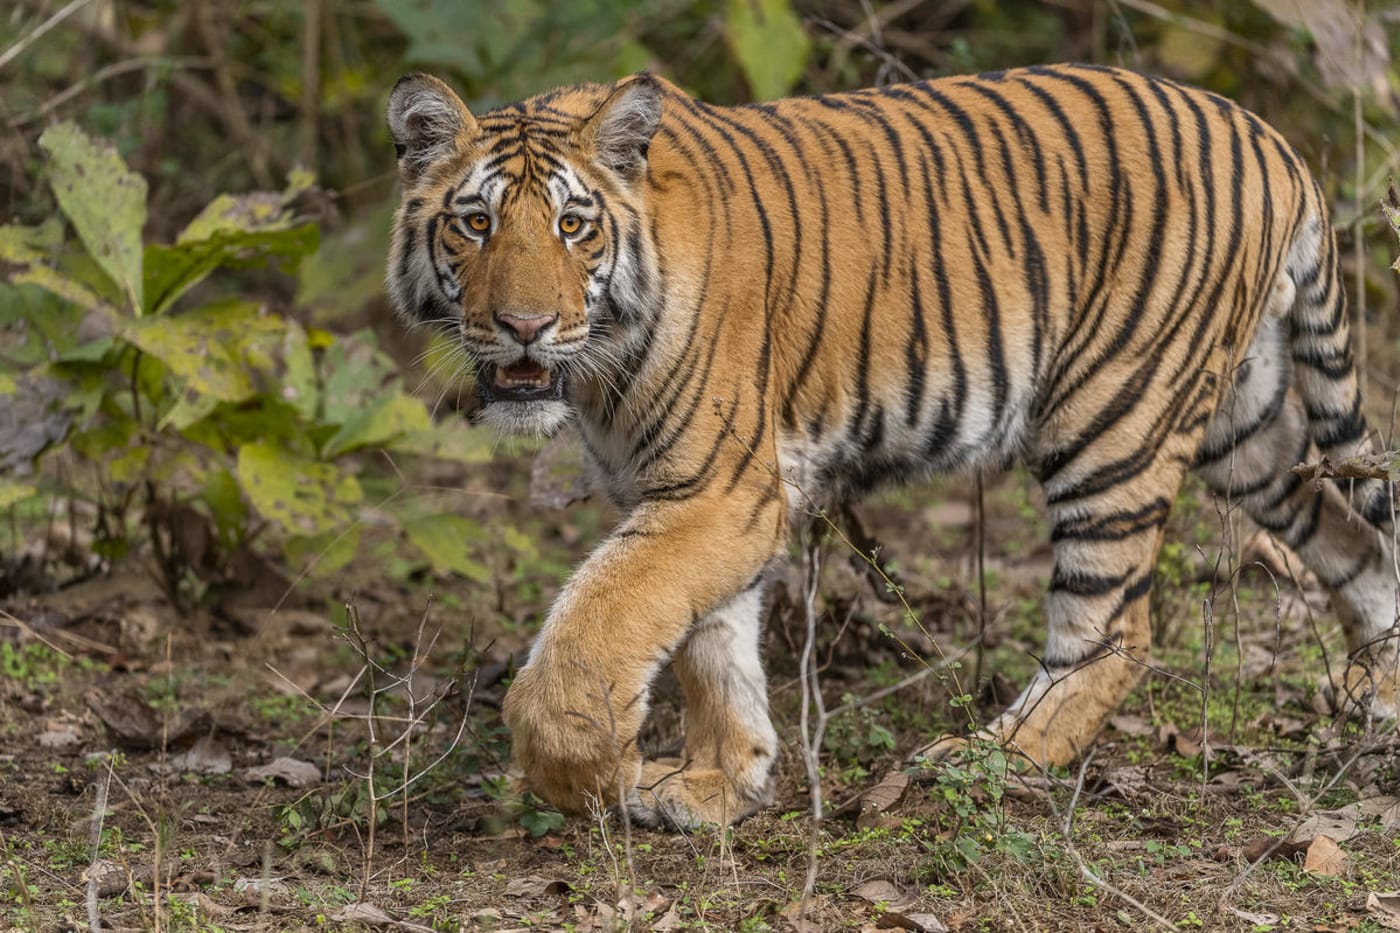 Tiger cub from Pench Tiger reserve India